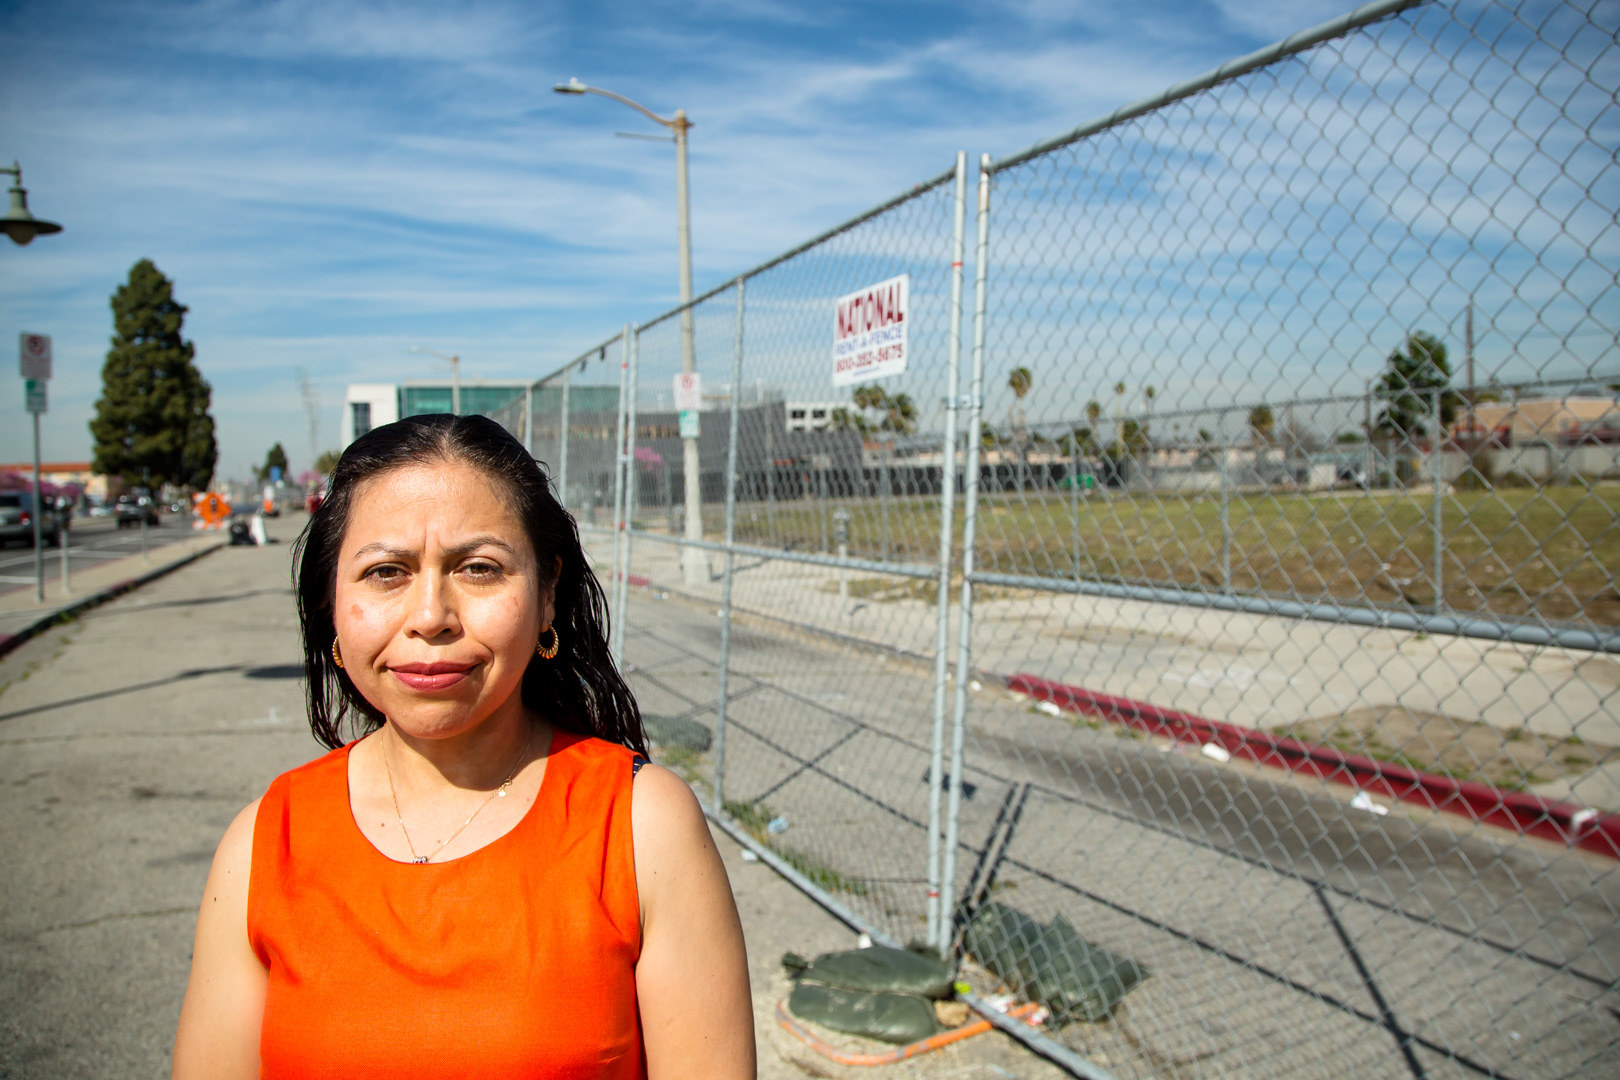 A woman standing in front of barbed-wire fencing looks into the camera